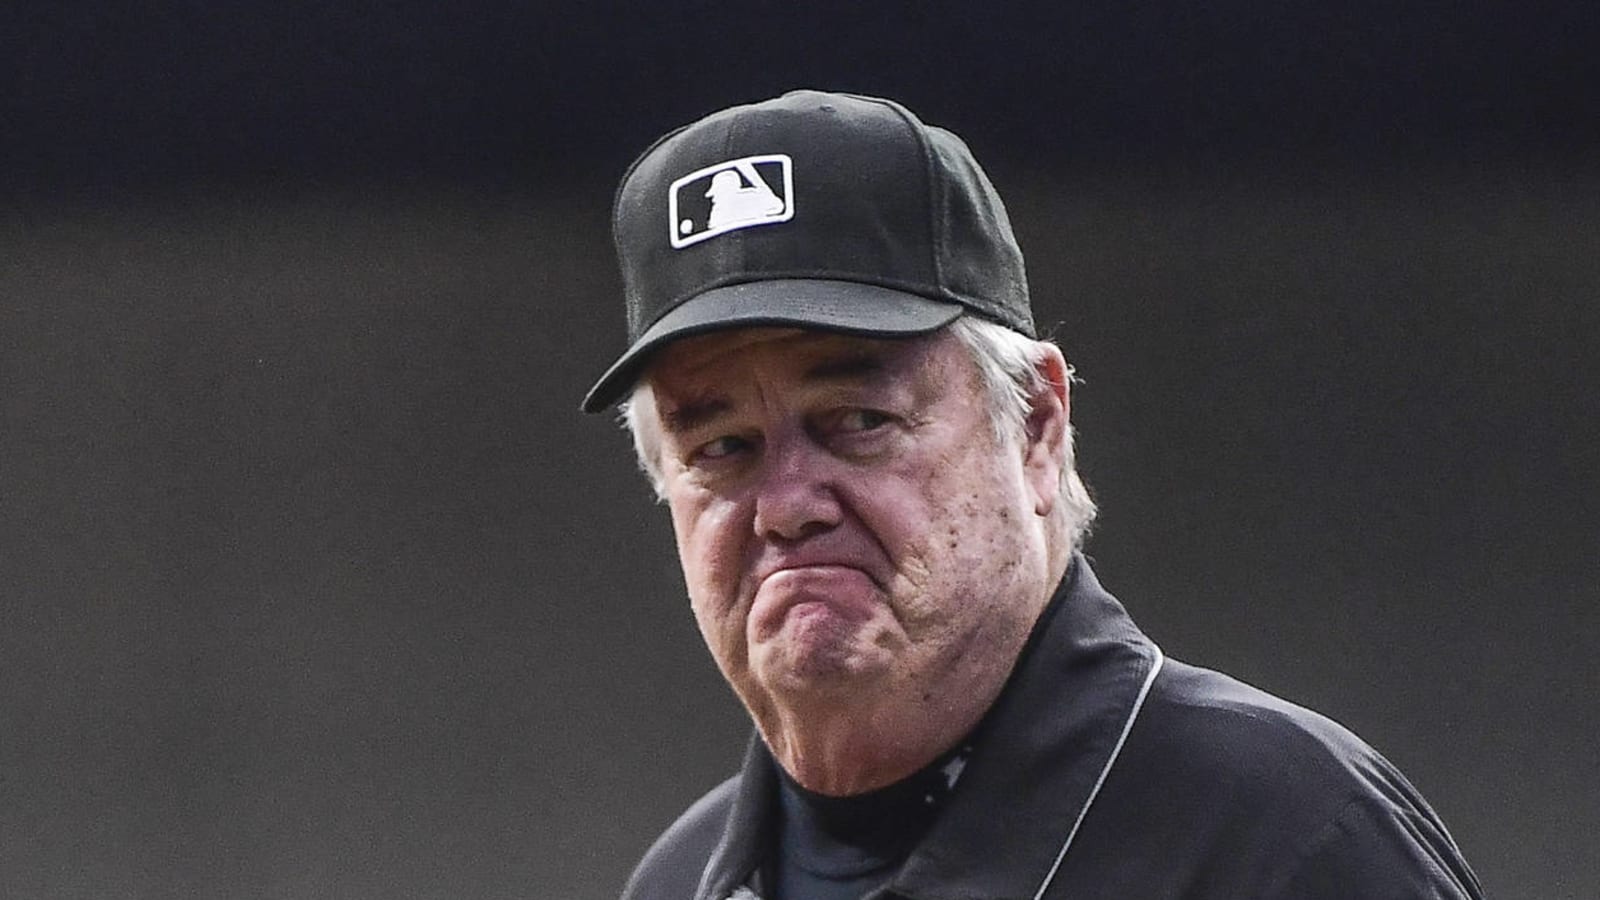 Umpire Joe West is reportedly retiring at end of MLB season